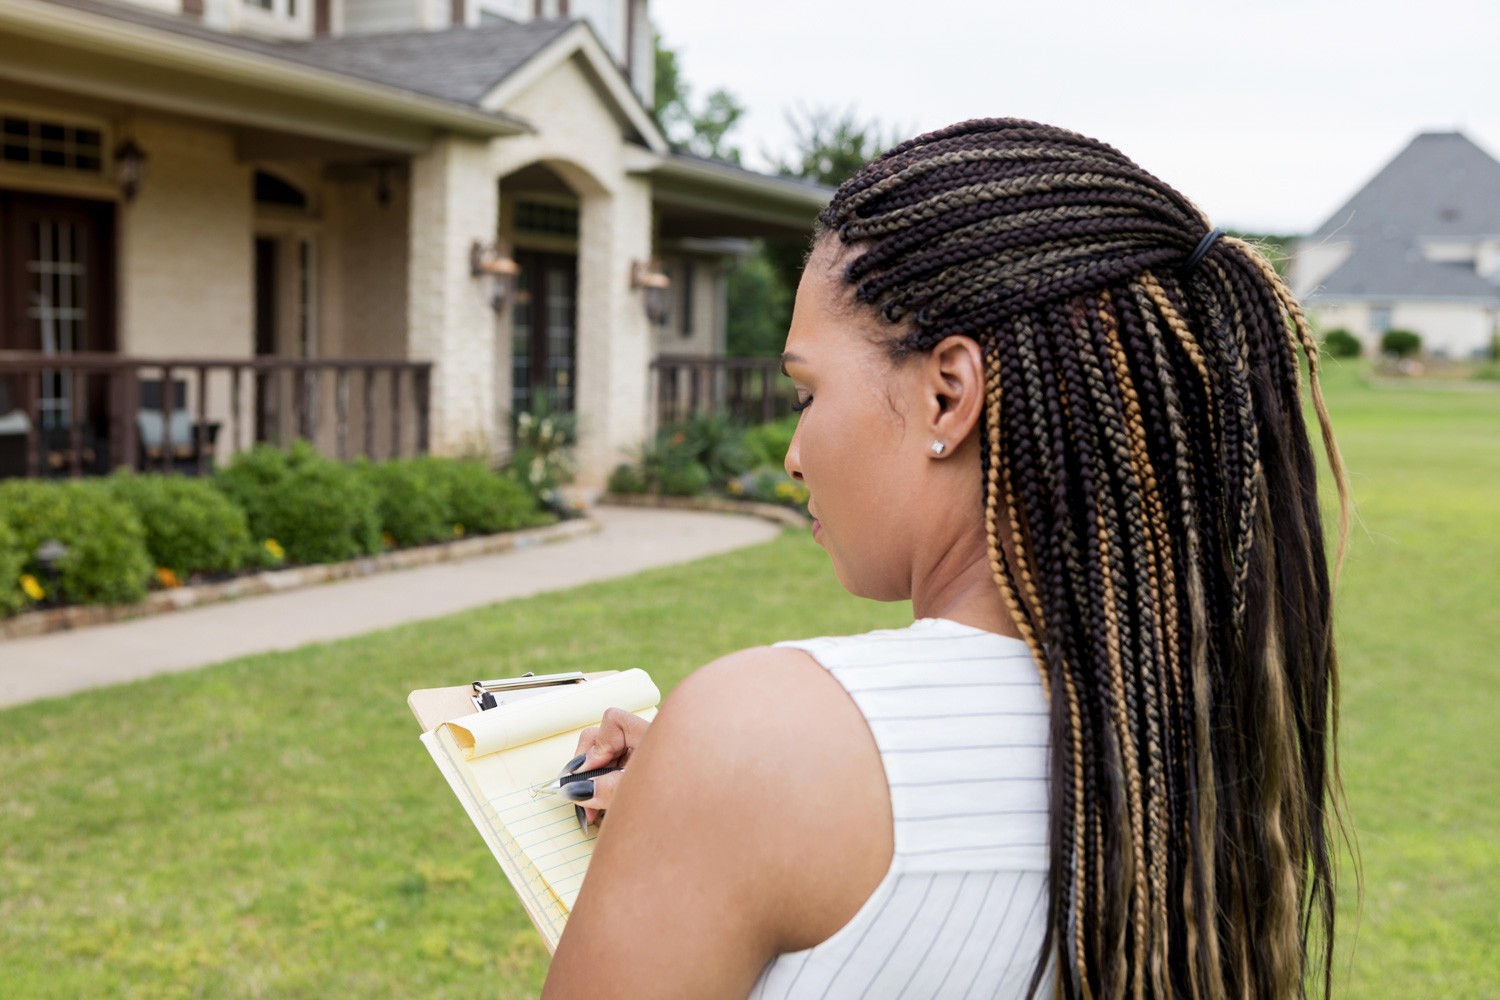 Before she puts the home on the market, the mid adult realtor evaluates the property.